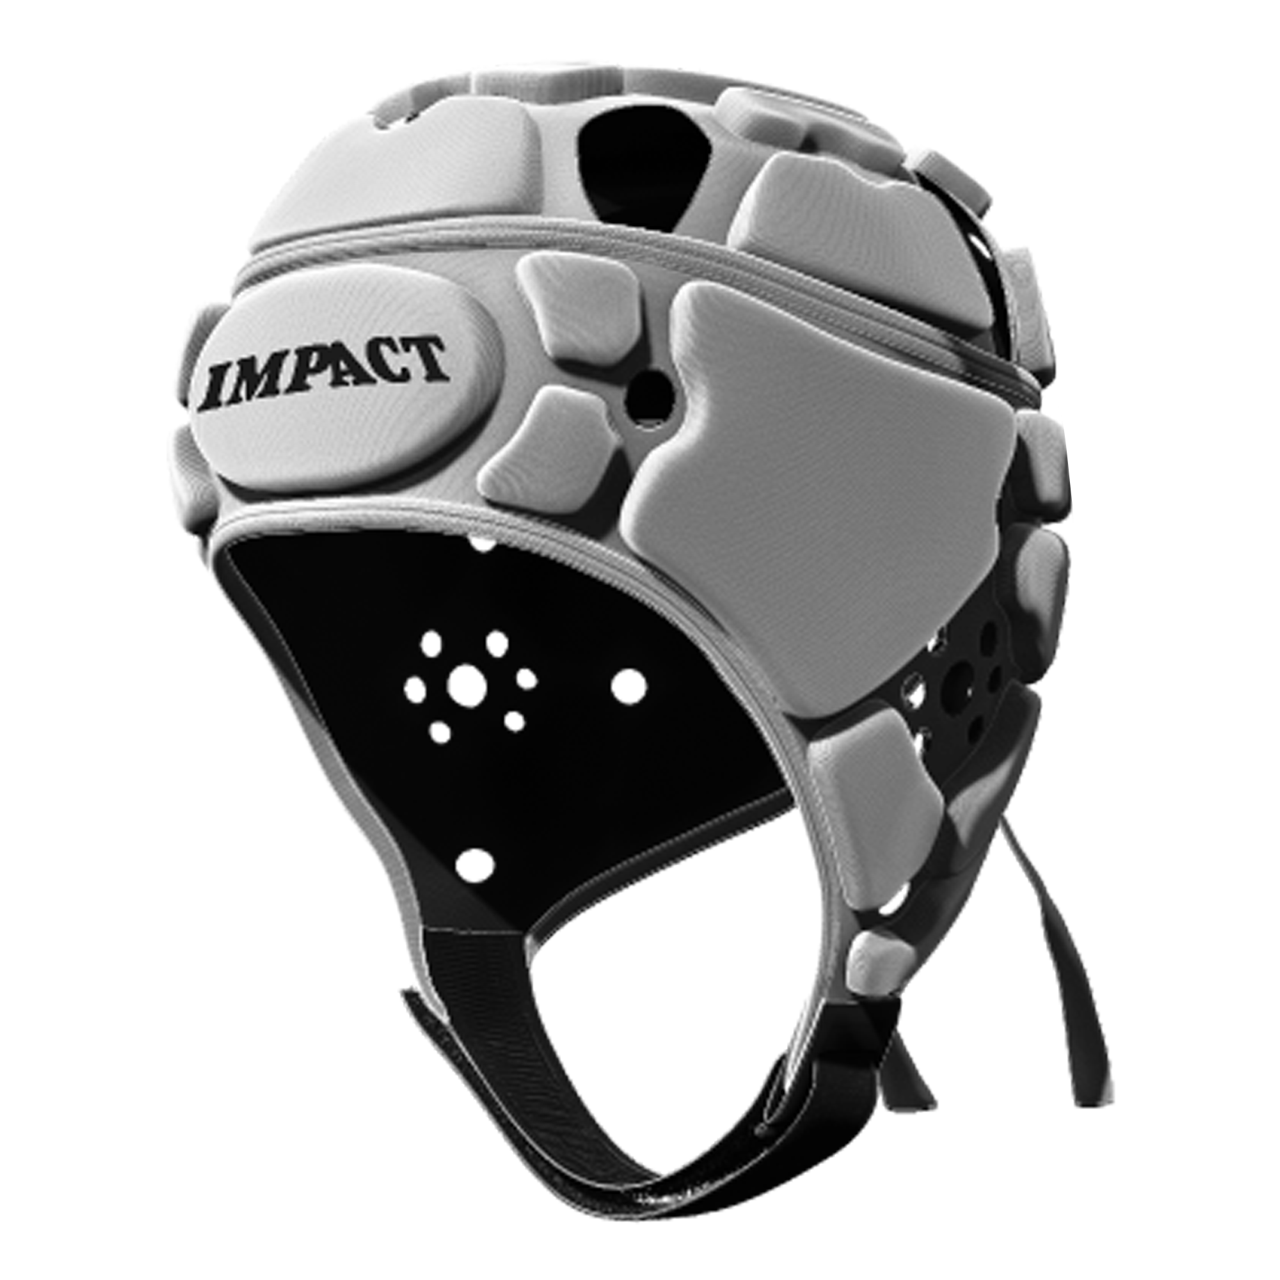 CASQUE RUGBY IMPACT ADULTE UNI BLANC - Univers Crampons